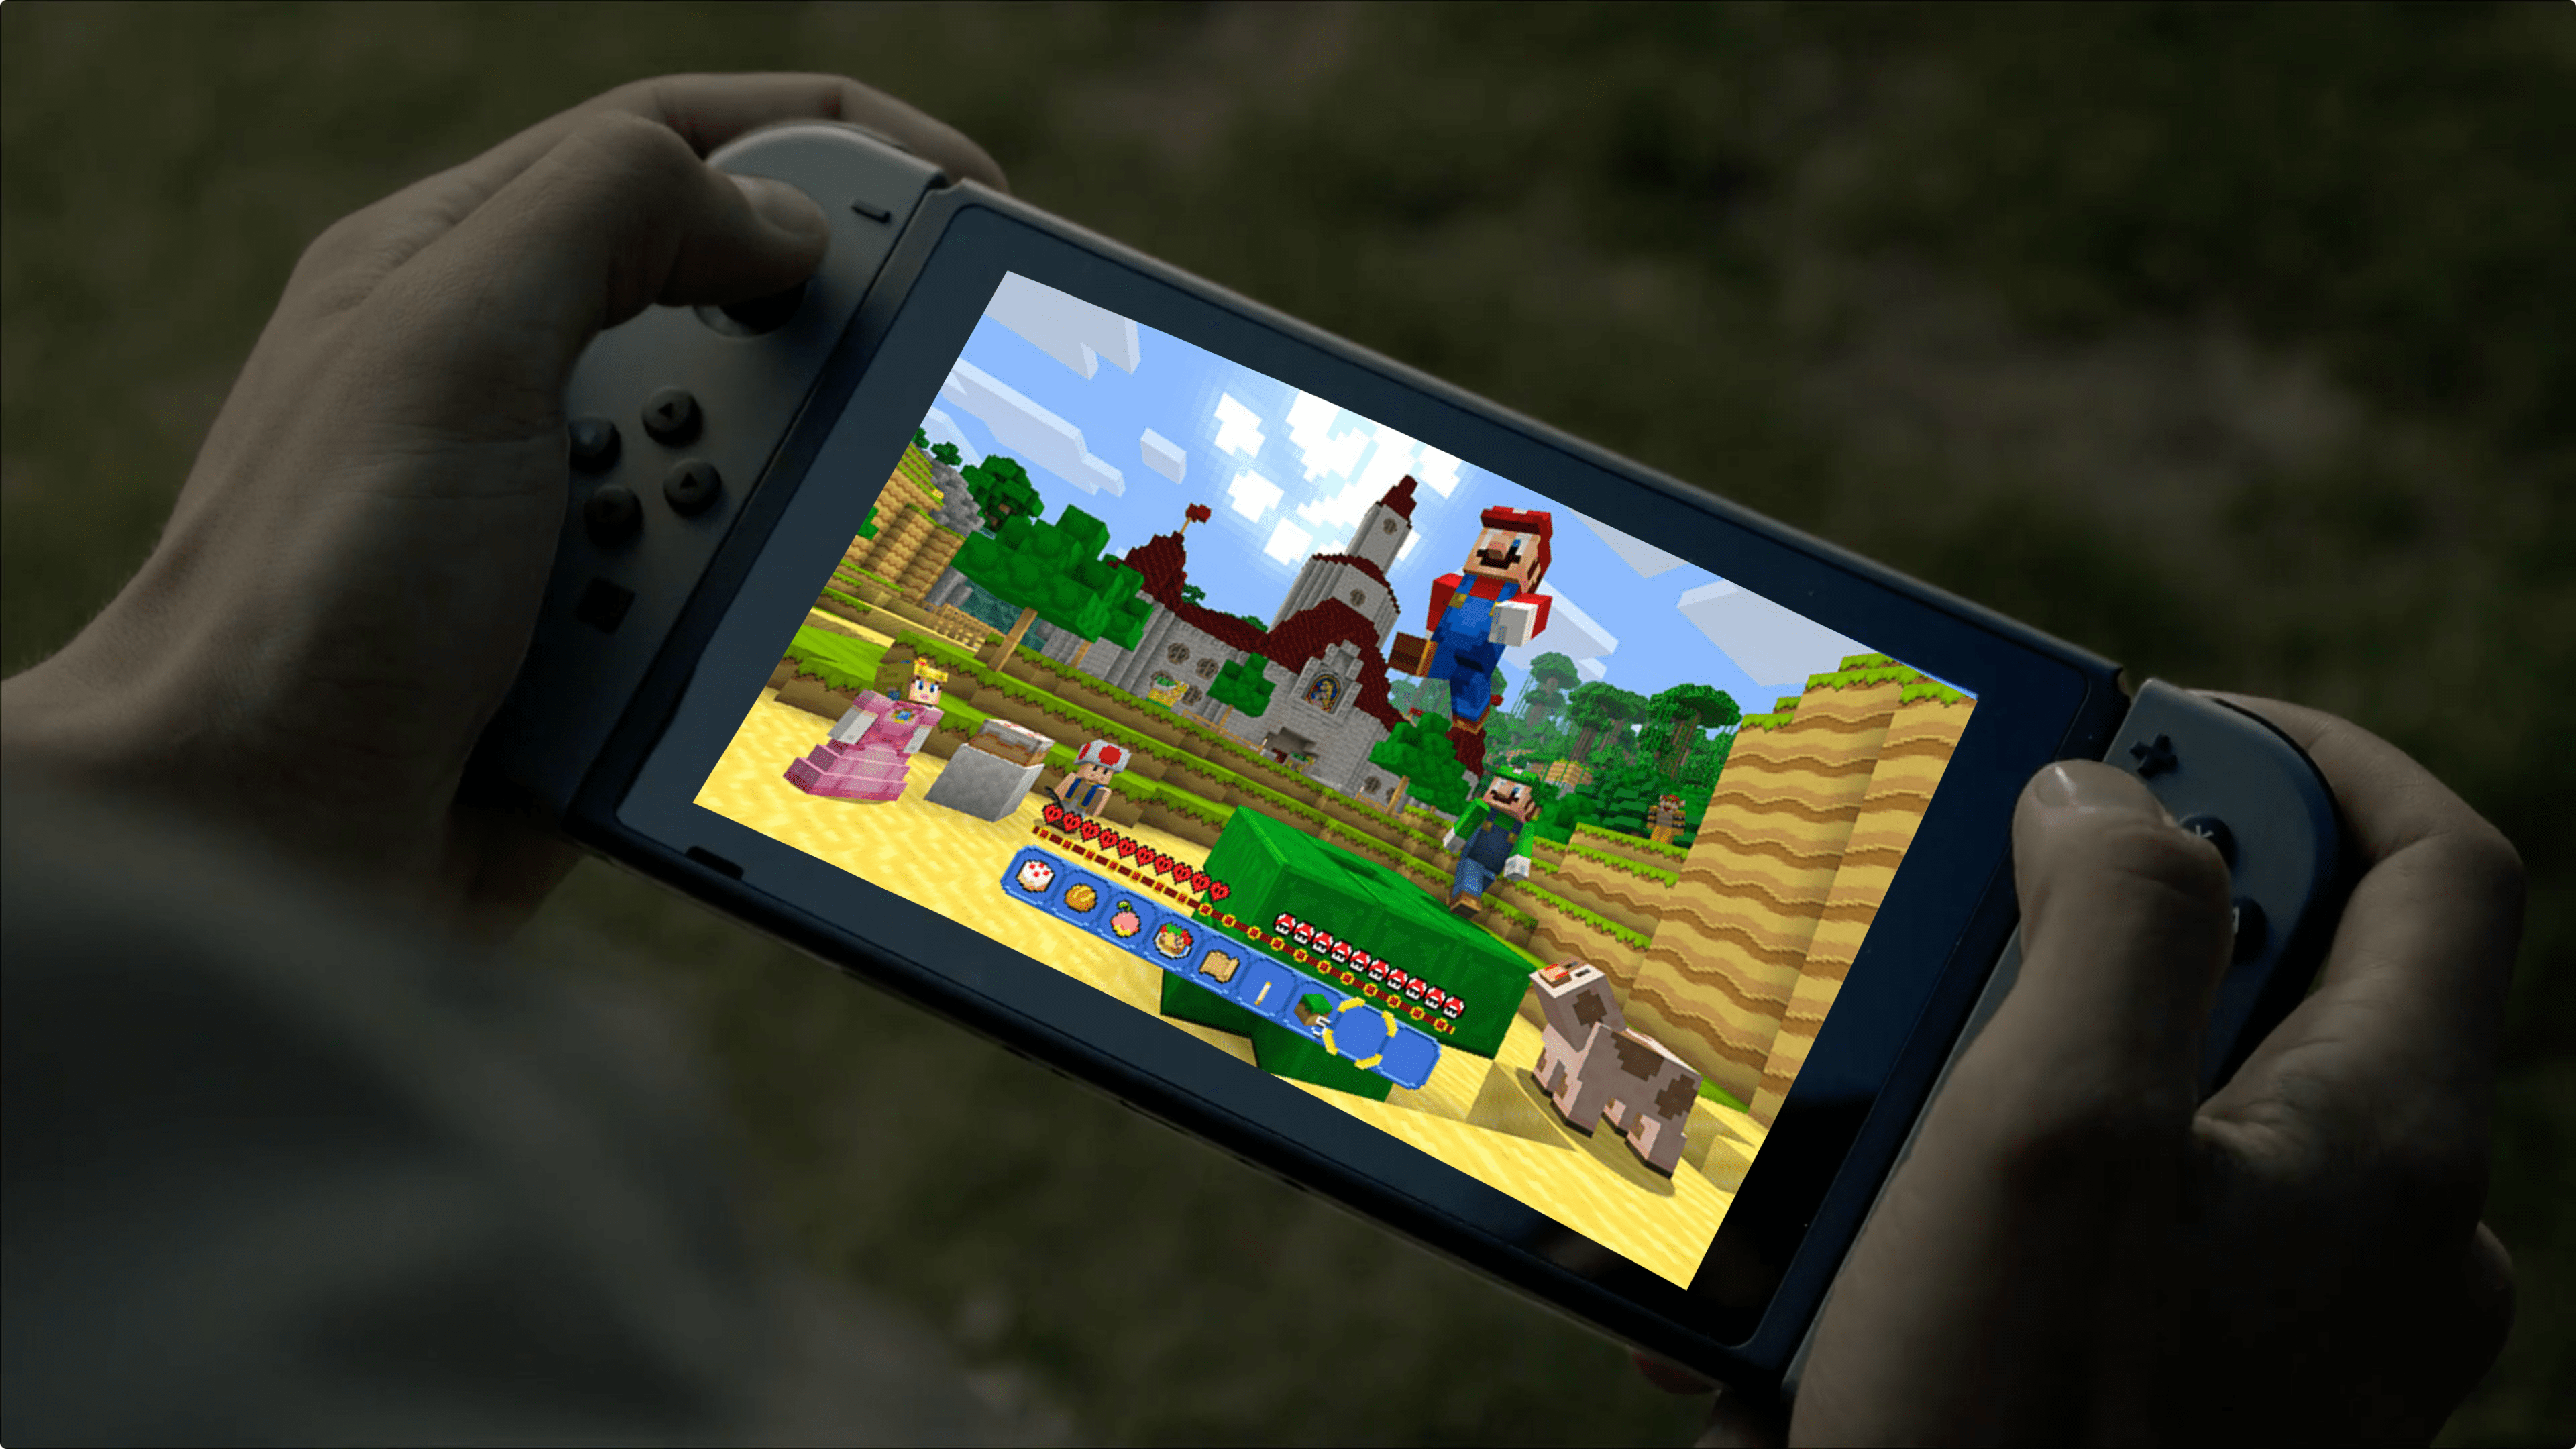 Minecraft makes its home on the Switch